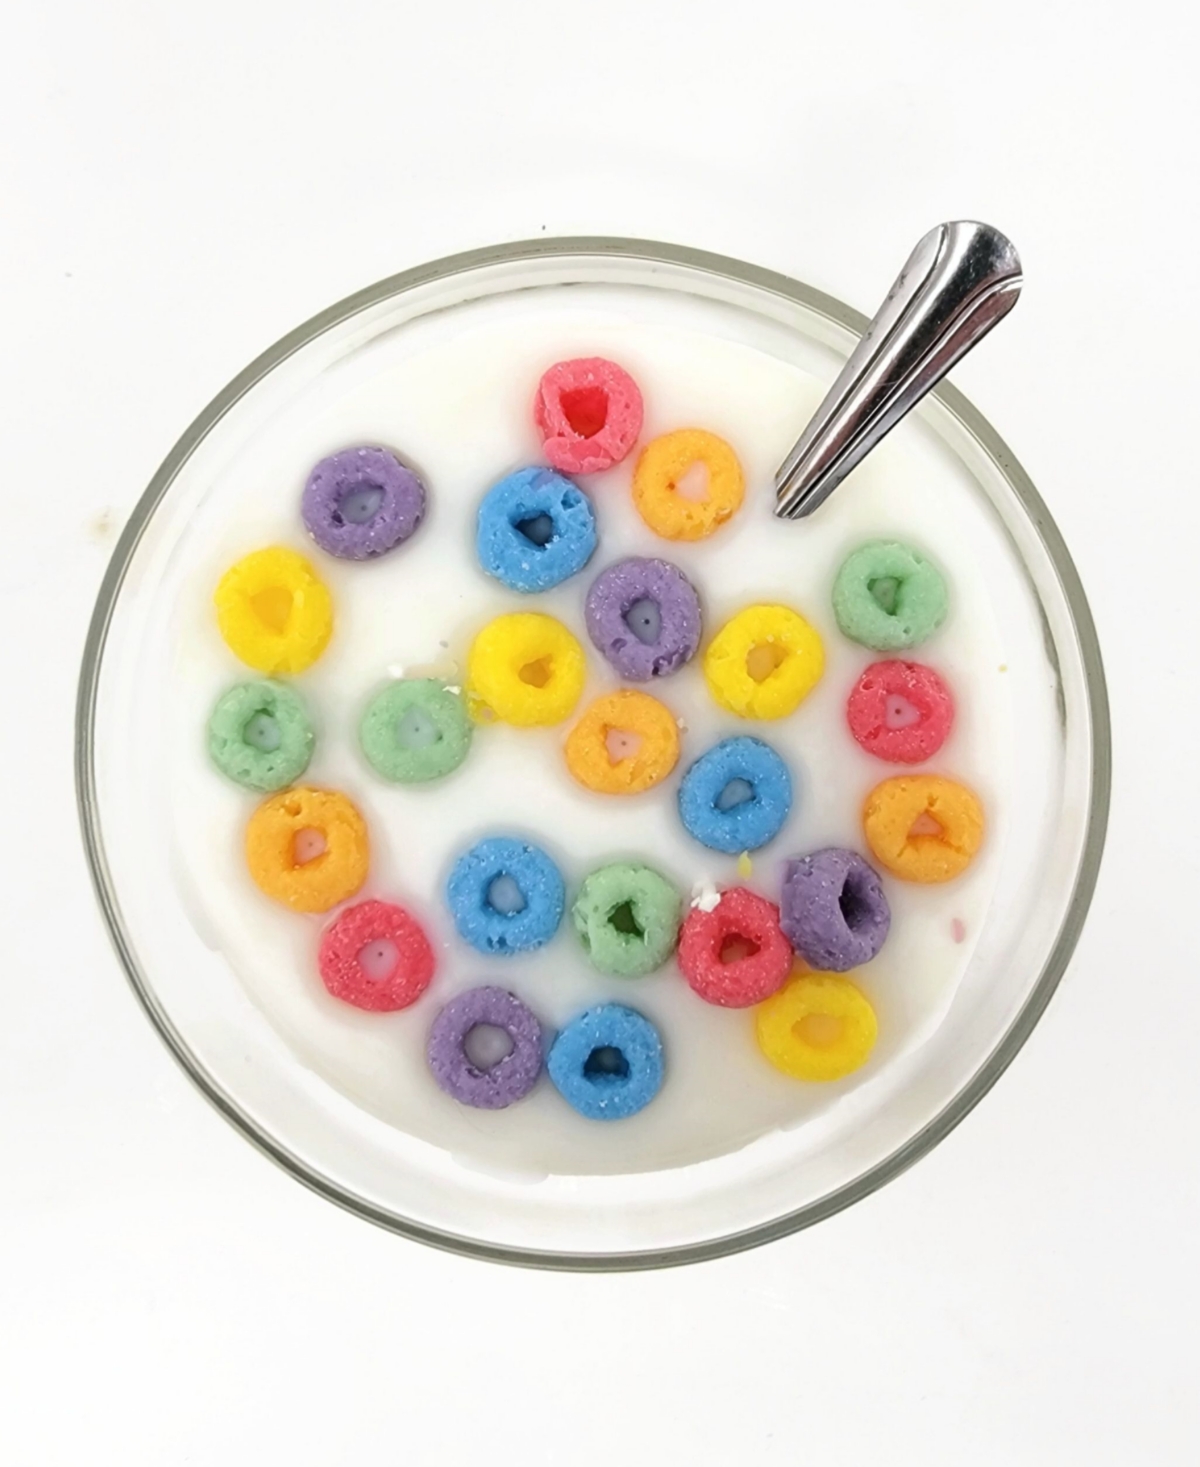 Candlelit Desserts 2-Wick Fruit Loops Style Scented Cereal Bowl Candle $6.95 at Macy's w/ Free Store Pickup